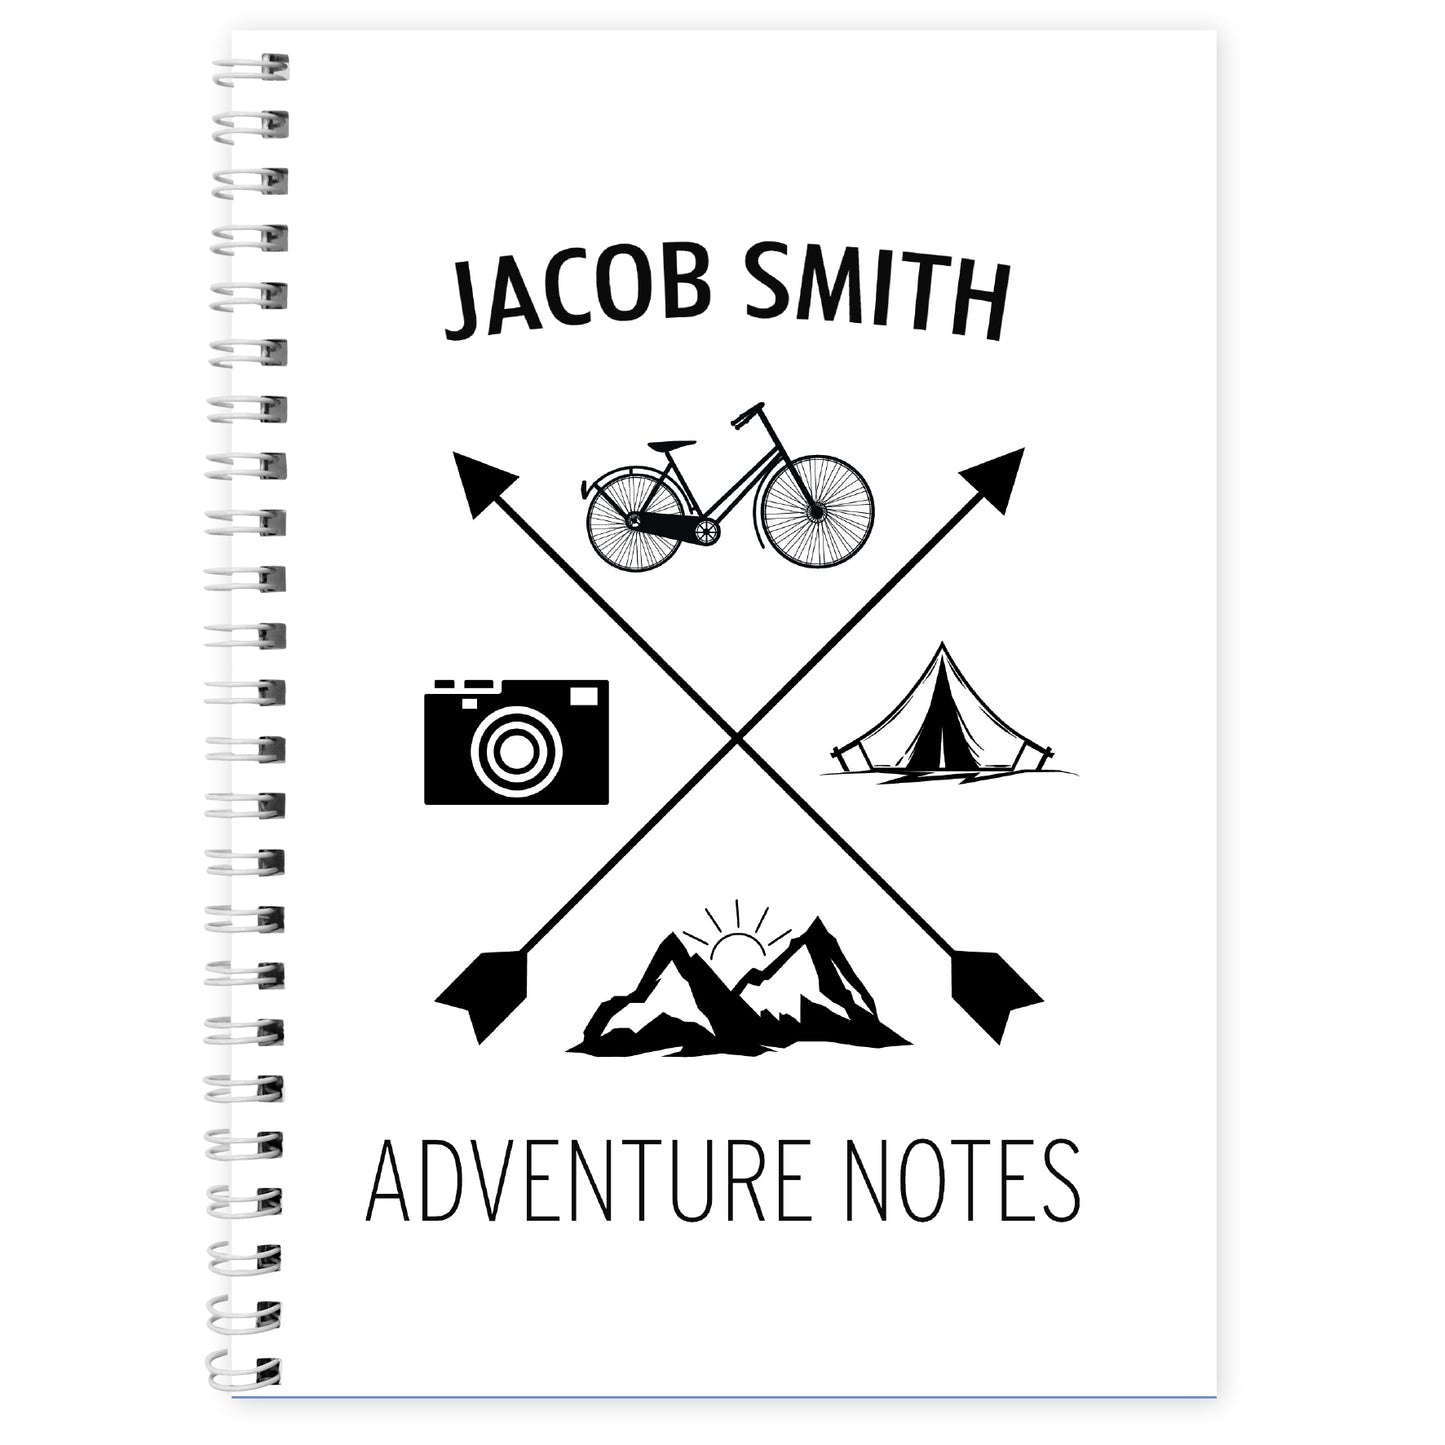 Personalised Adventure A5 Notebook - Personalise It!